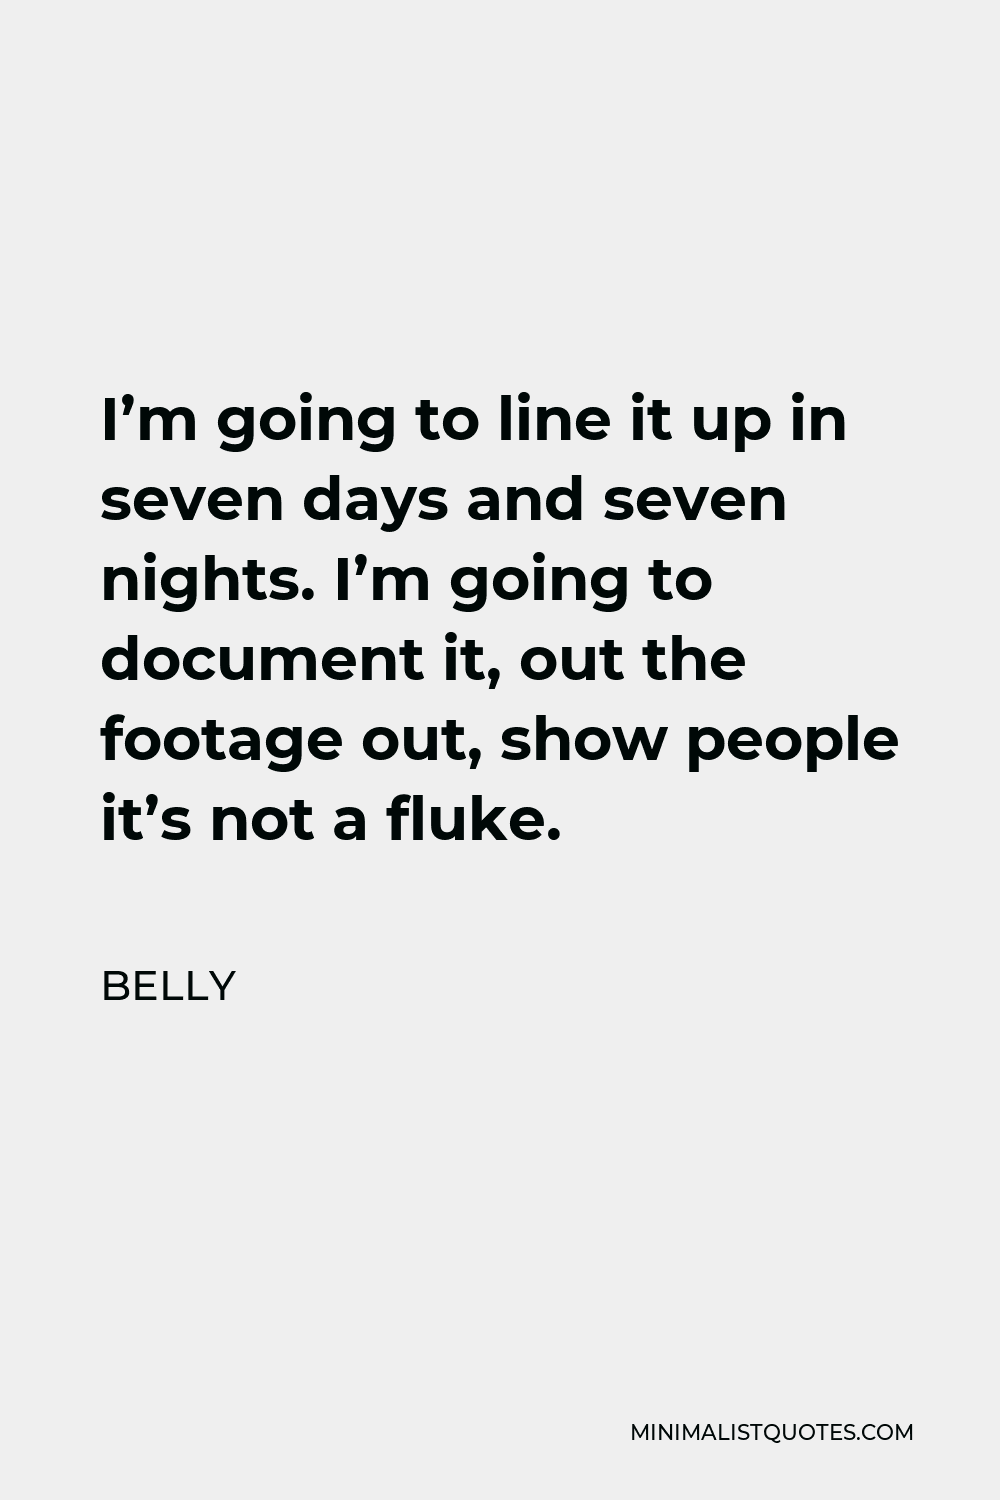 Belly Quote - I’m going to line it up in seven days and seven nights. I’m going to document it, out the footage out, show people it’s not a fluke.